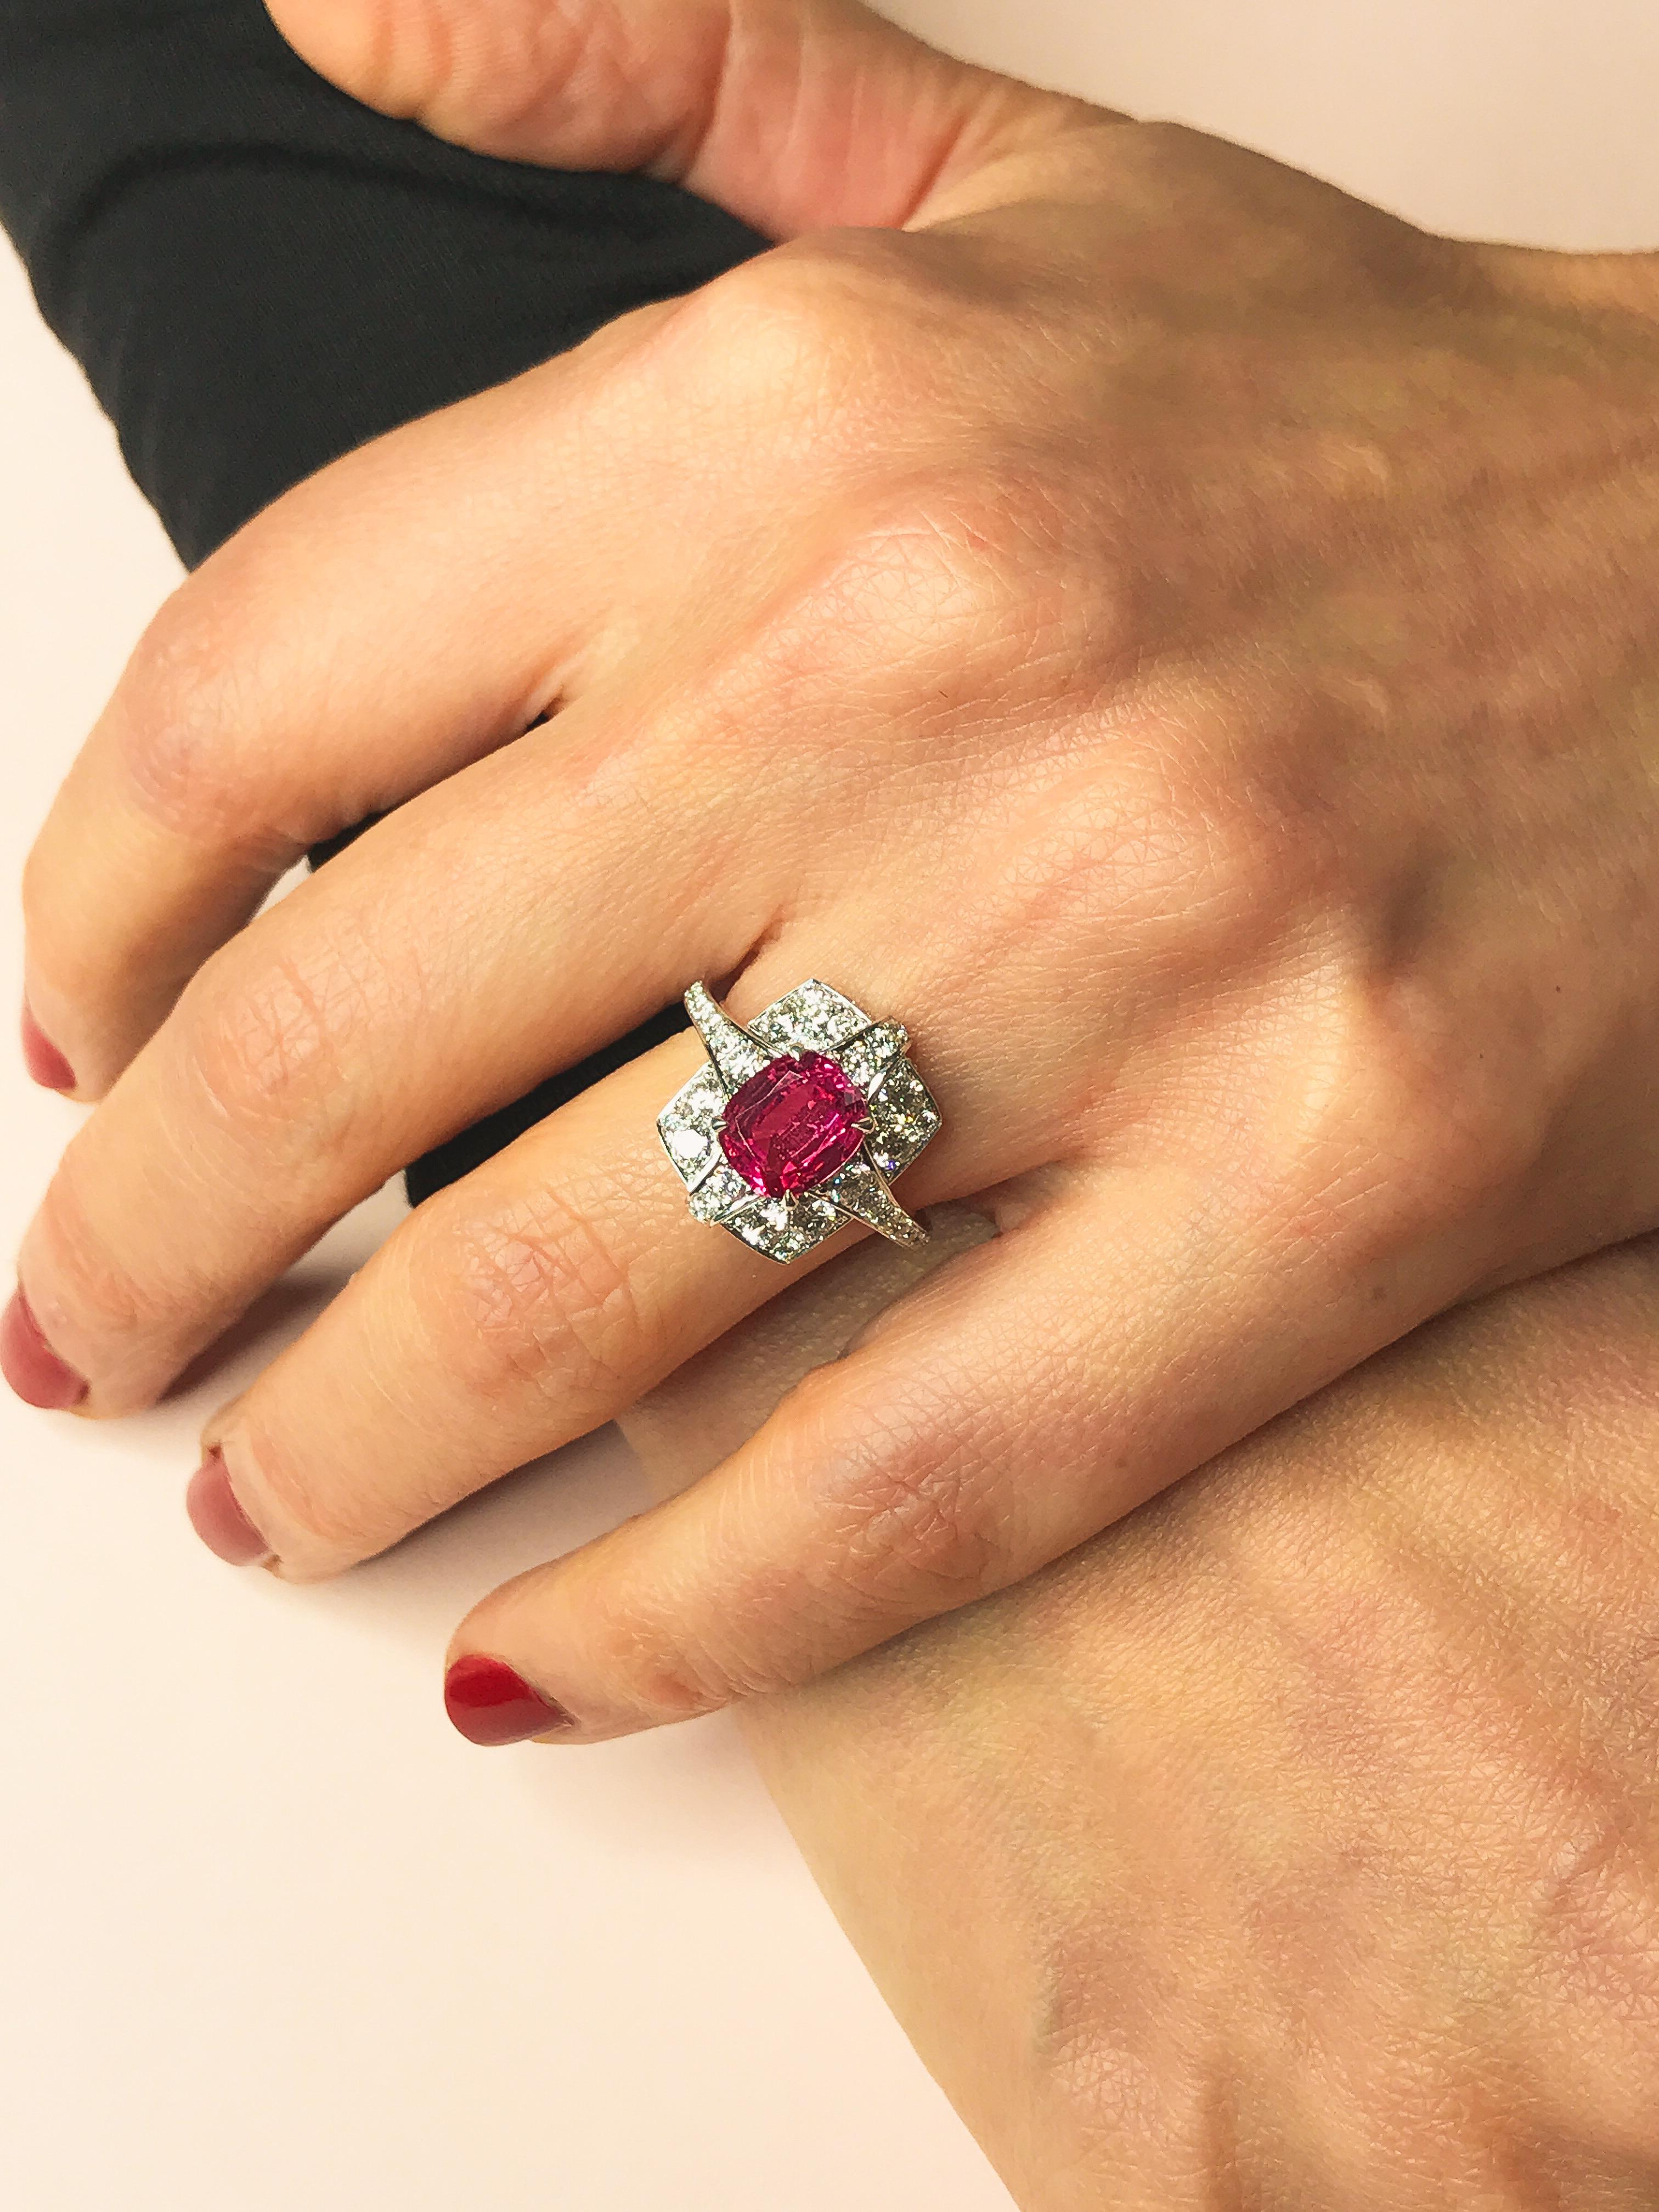 2.06 Carat Pink Spinel Cocktail Ring With Diamonds Set In White Gold 1